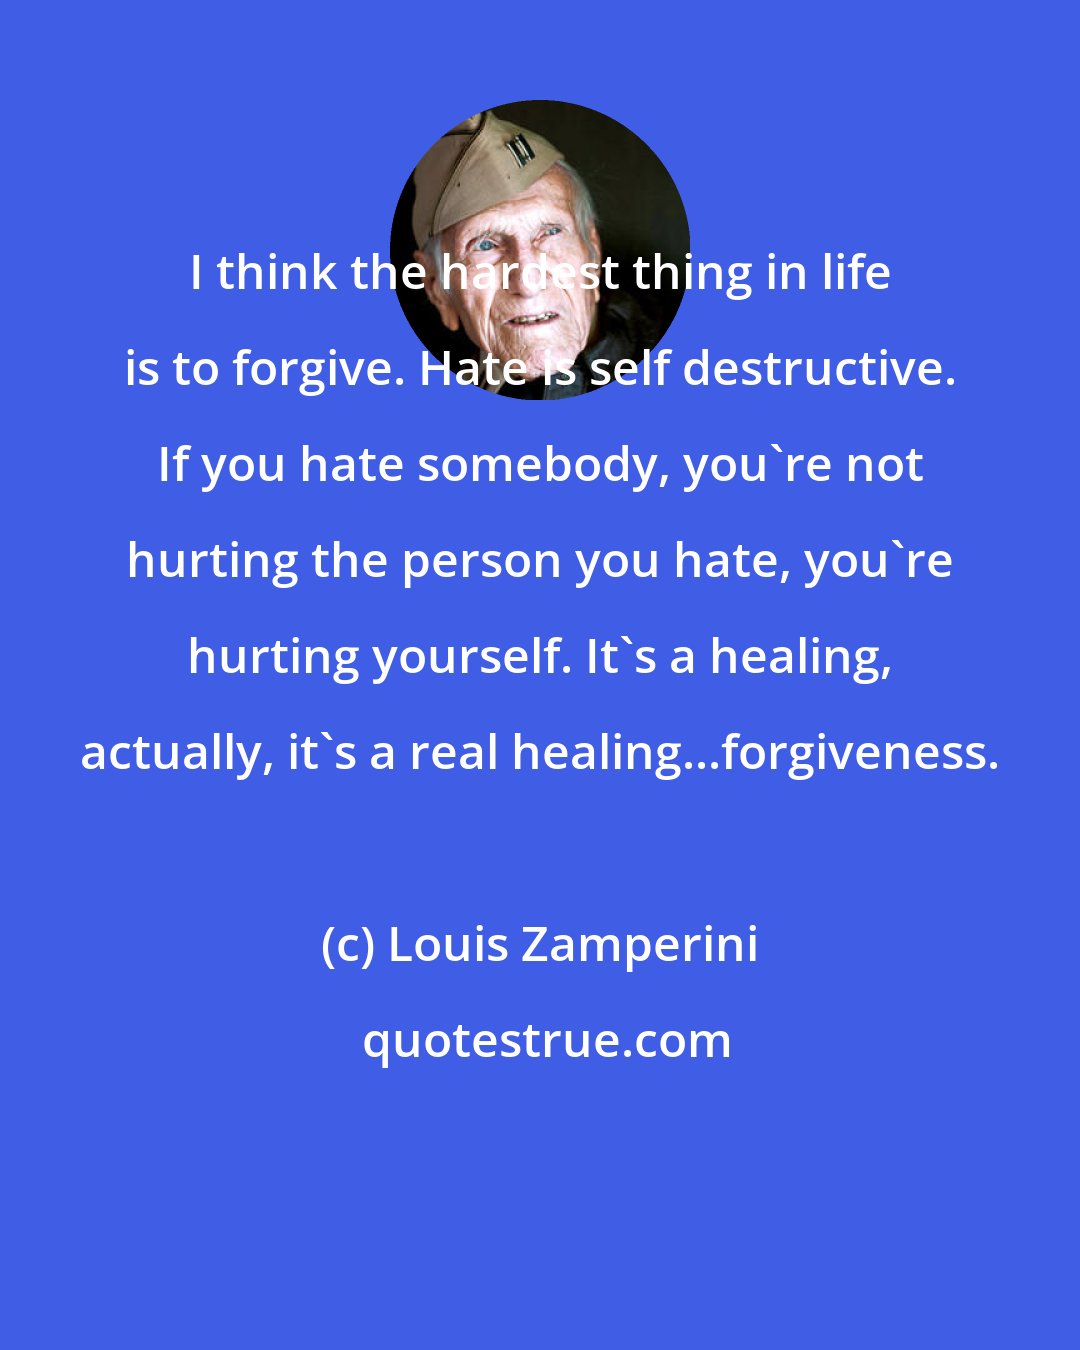 Louis Zamperini: I think the hardest thing in life is to forgive. Hate is self destructive. If you hate somebody, you're not hurting the person you hate, you're hurting yourself. It's a healing, actually, it's a real healing...forgiveness.